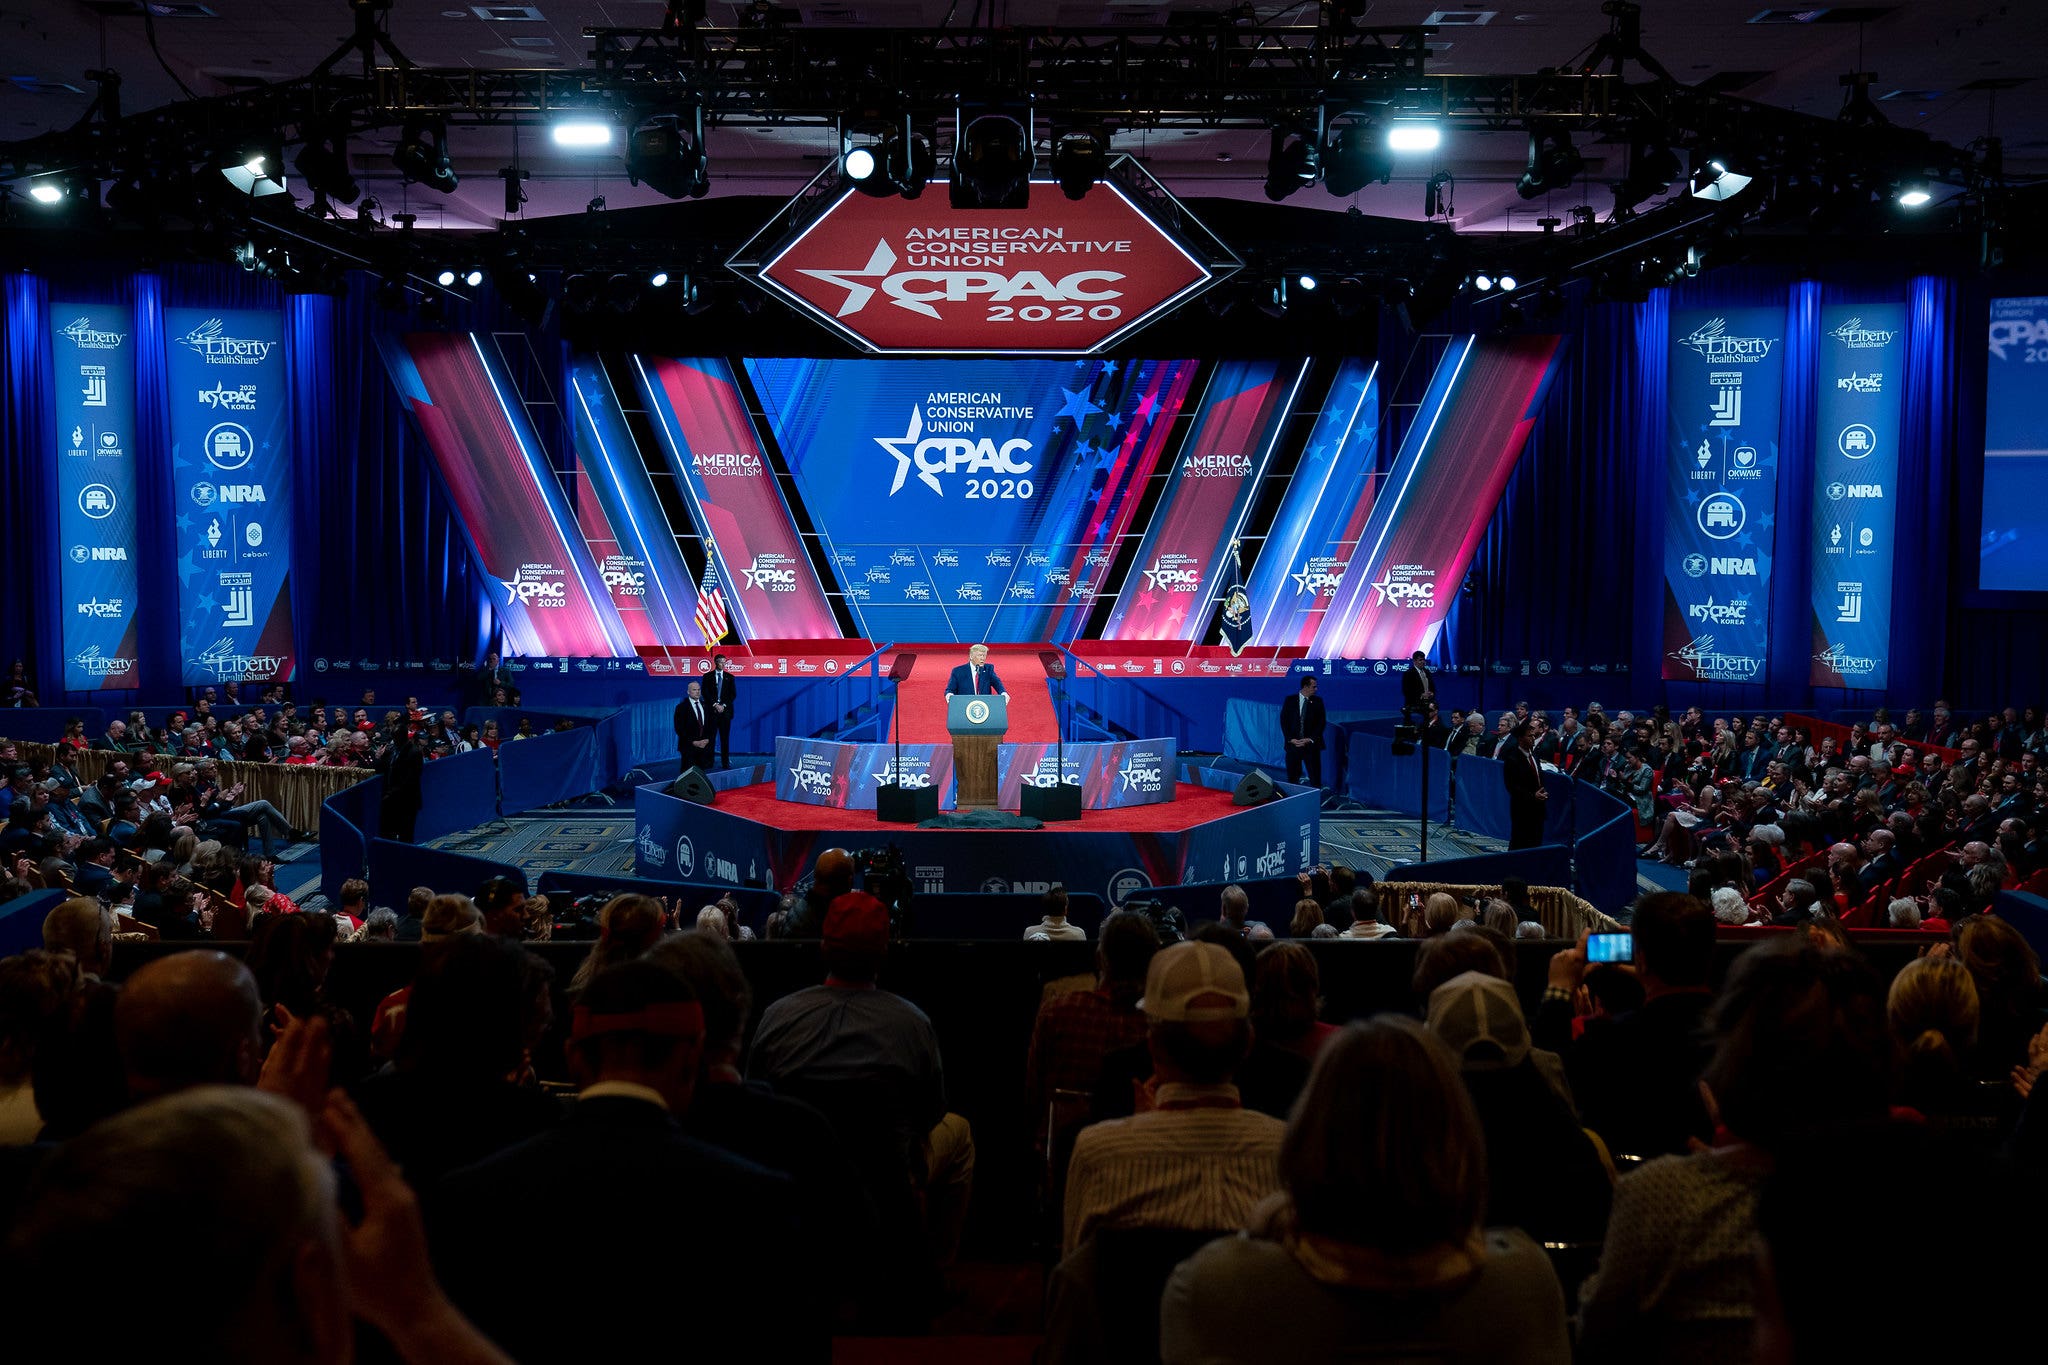 CPAC organizers accuse Politico of trying to ‘cancel’ the conservative event with ‘misleading’ allegations to the sponsors